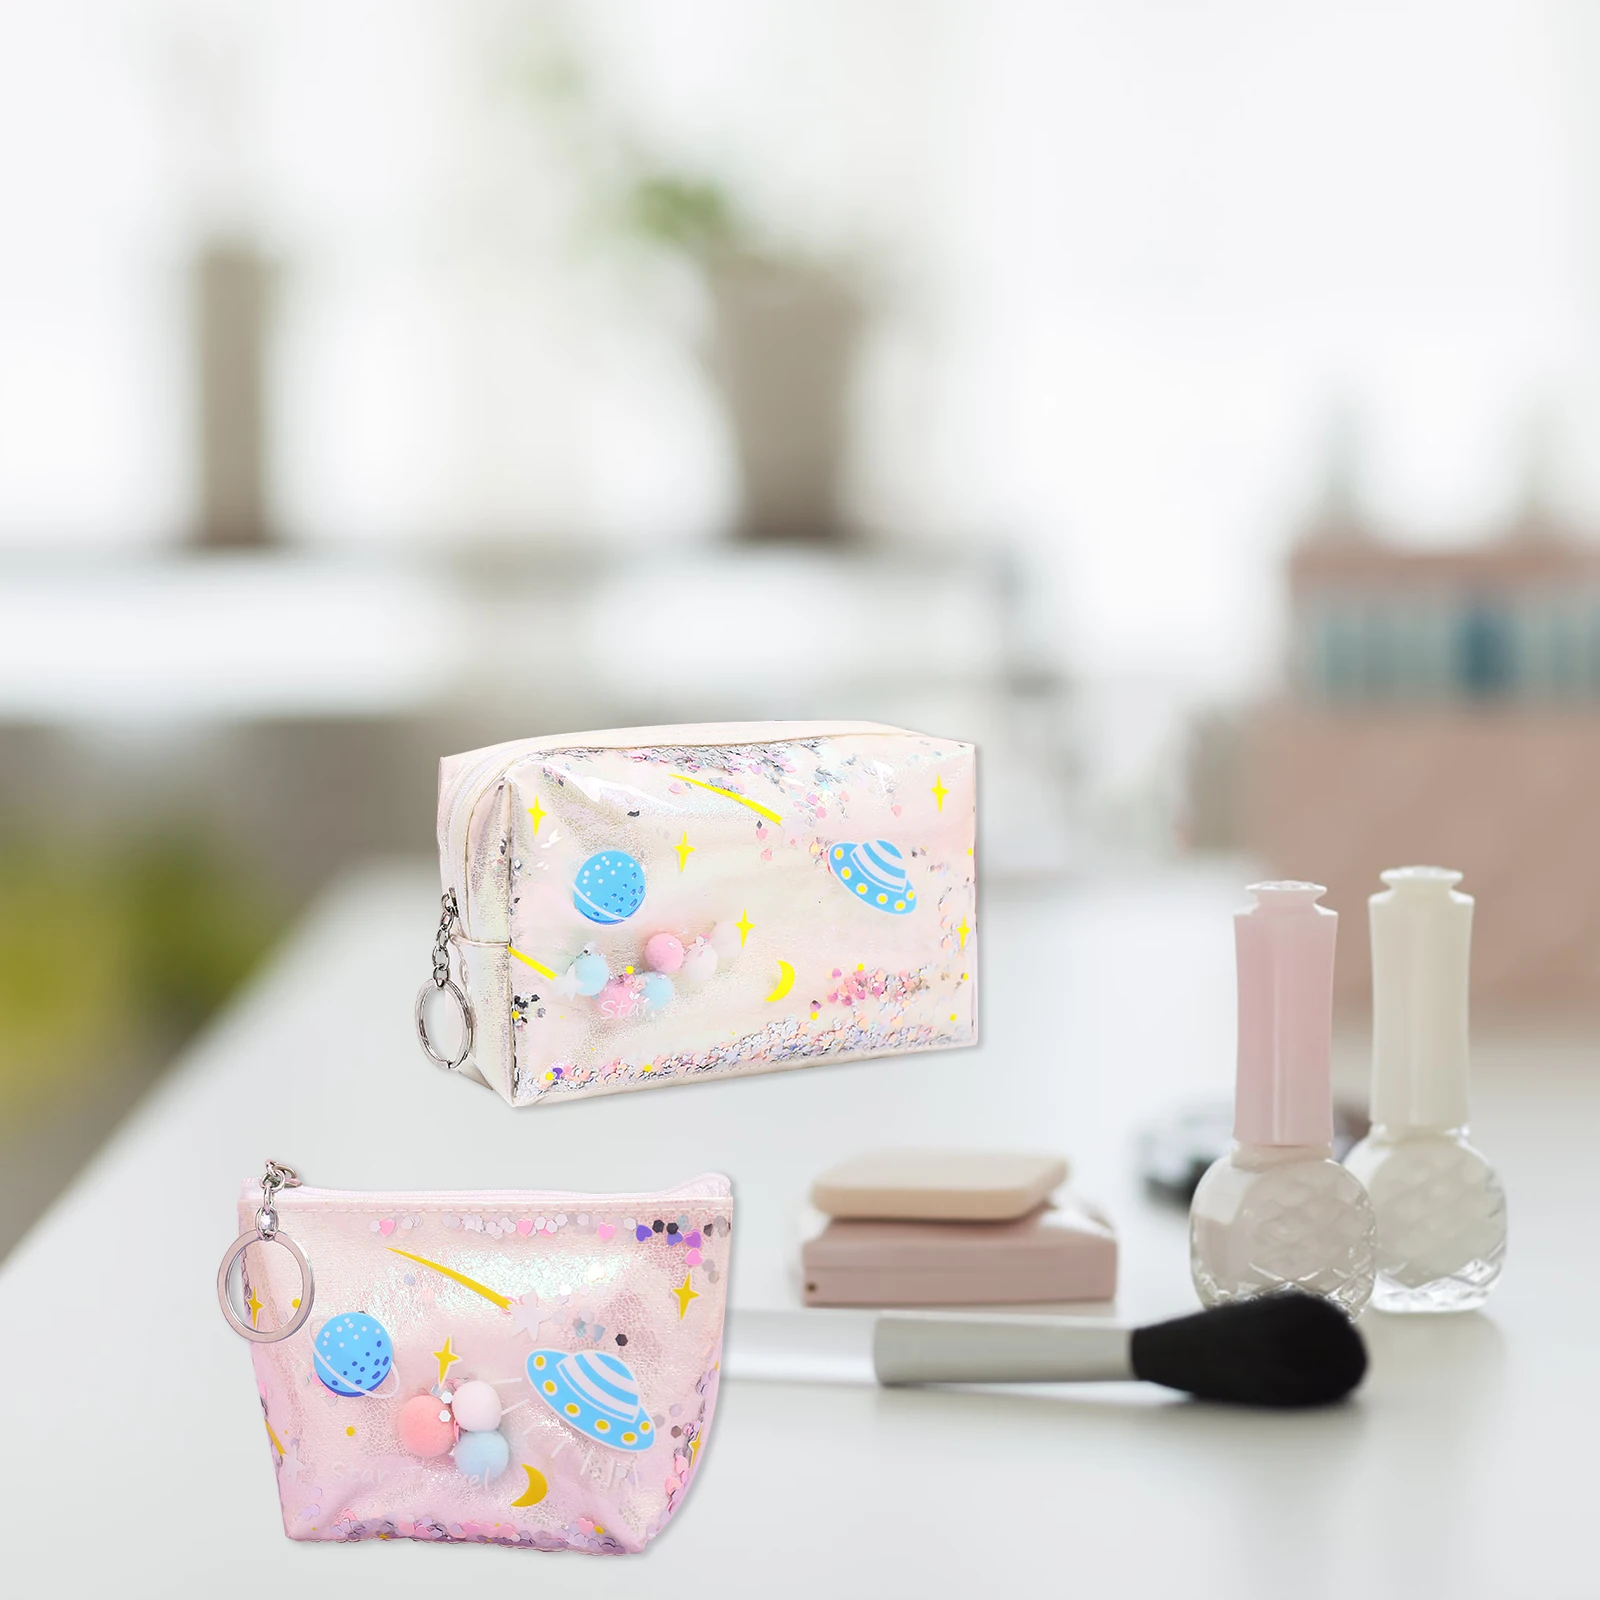 

2pcs Holographic Cosmetic Makeup Bag, Iridescent Portable Zippered Toiletry Bag Waterproof Female Jelly Bag Lady Make up Pouch